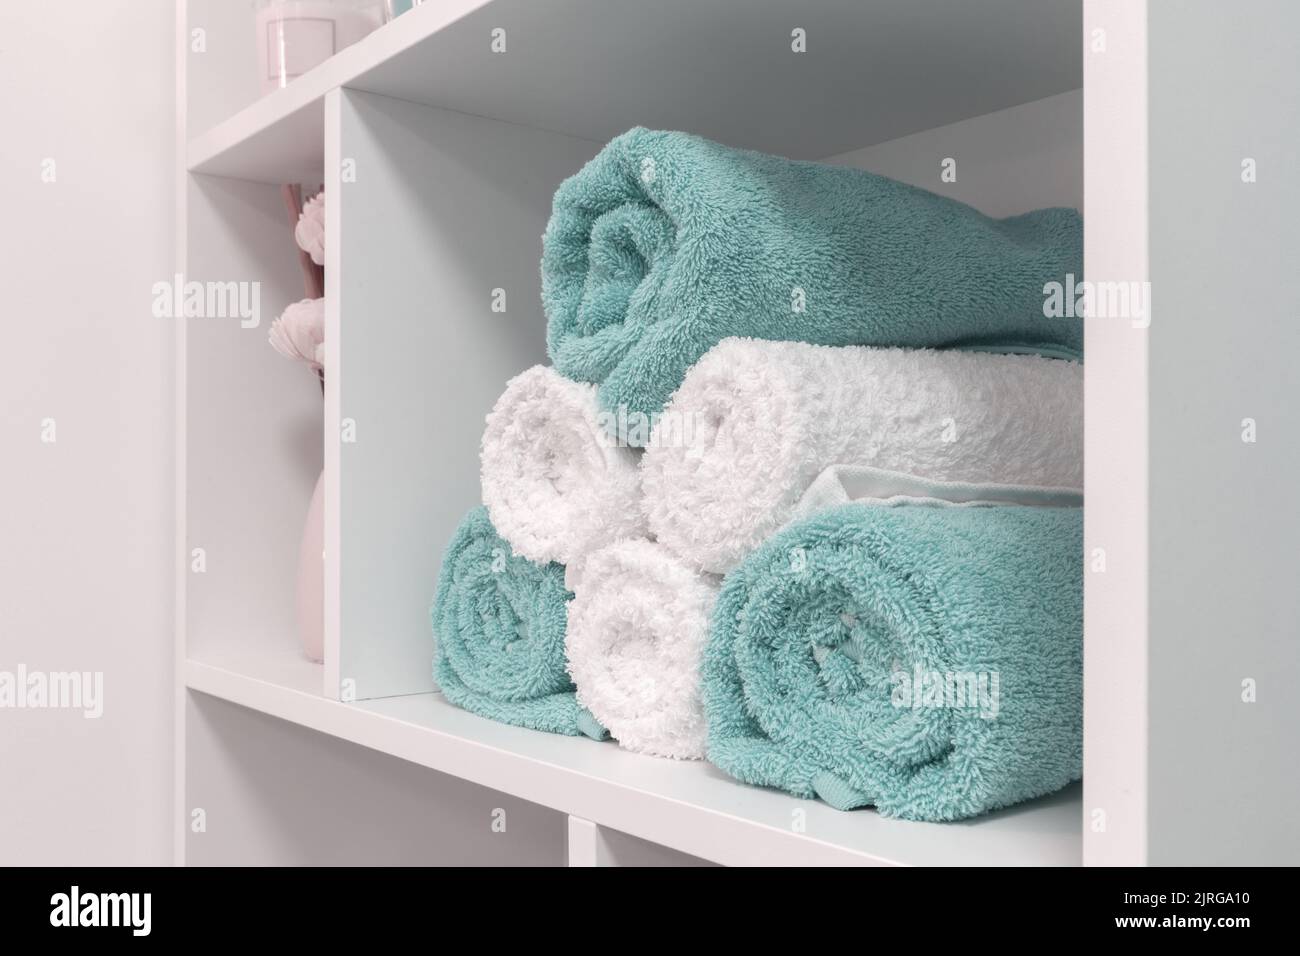 folded towels in the shelf, close up, white and blue Stock Photo